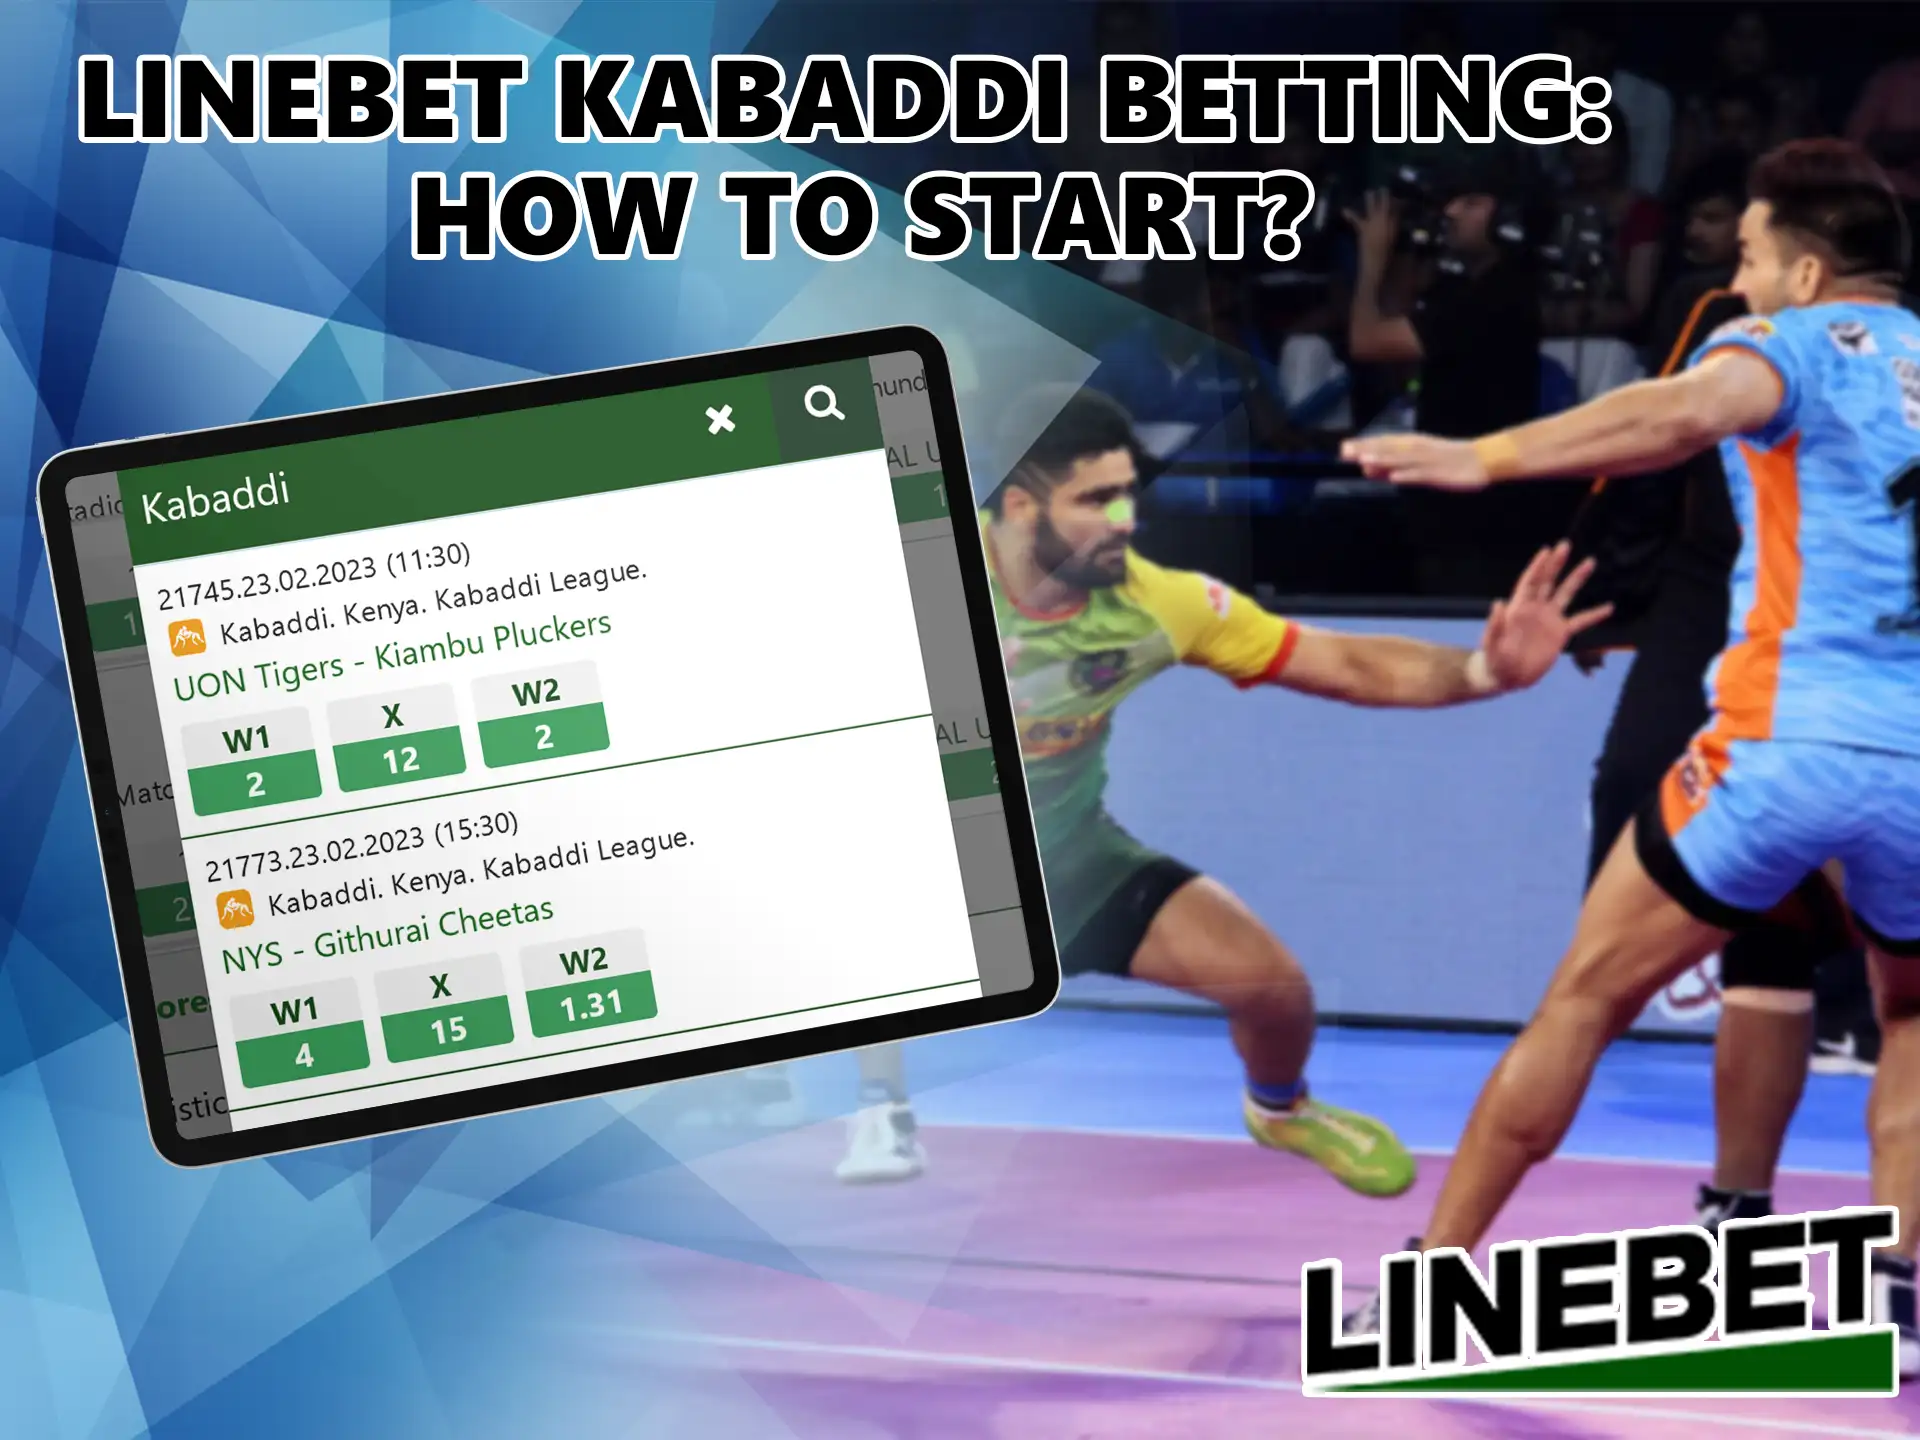 To take your first steps in betting on the sport at Linebet, you need to create an account and fund your account.